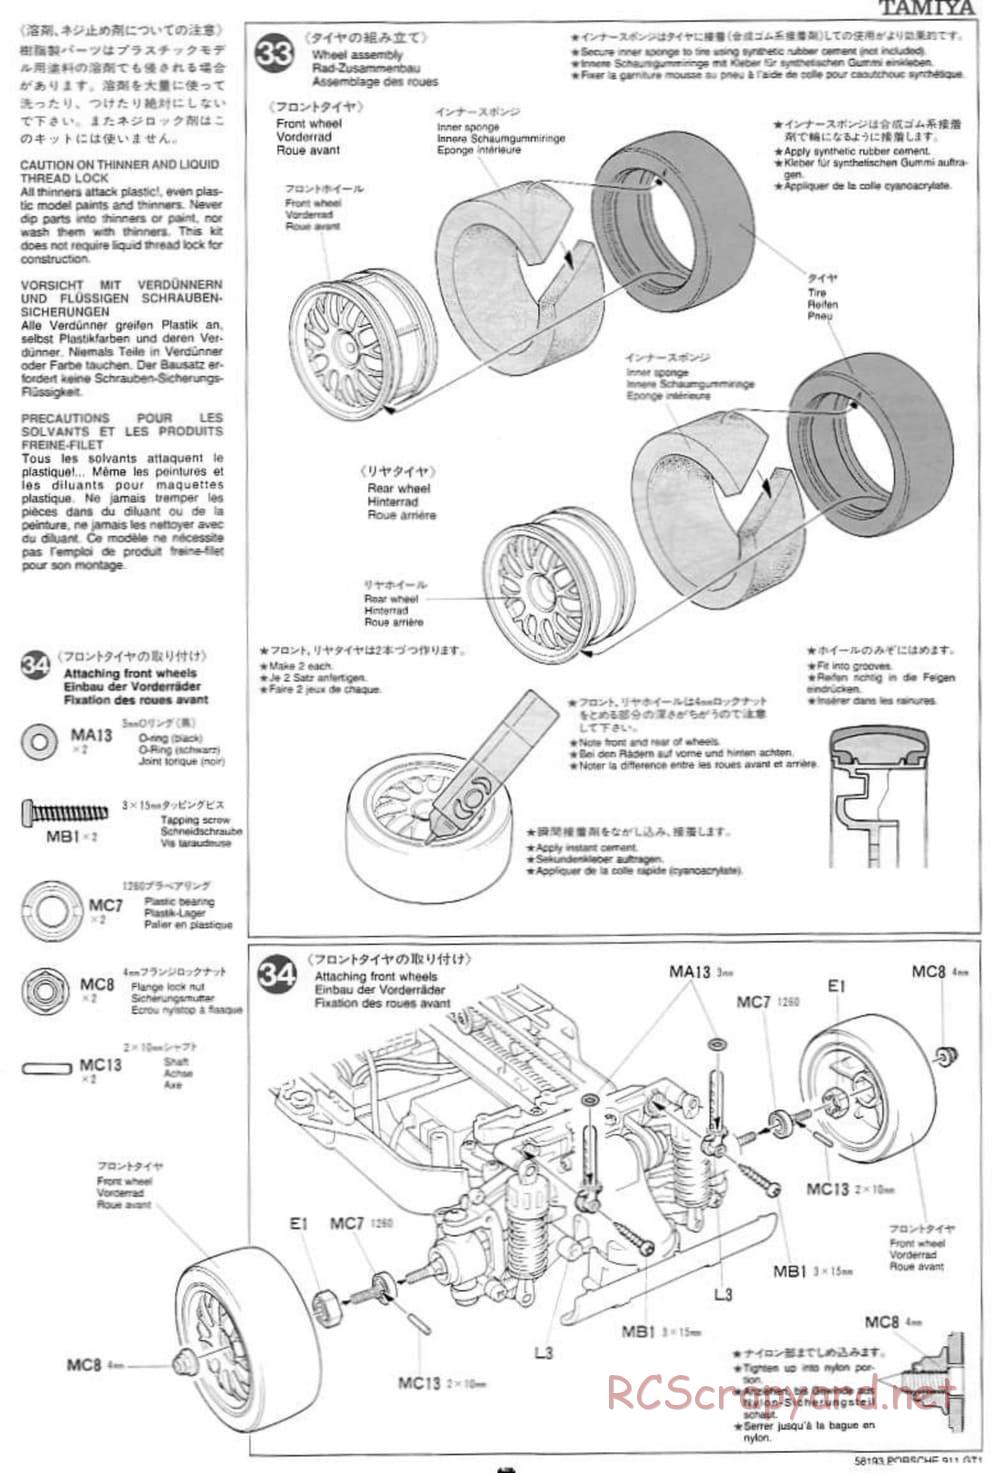 Tamiya - Porsche 911 GT1 - TA-03RS Chassis - Manual - Page 17